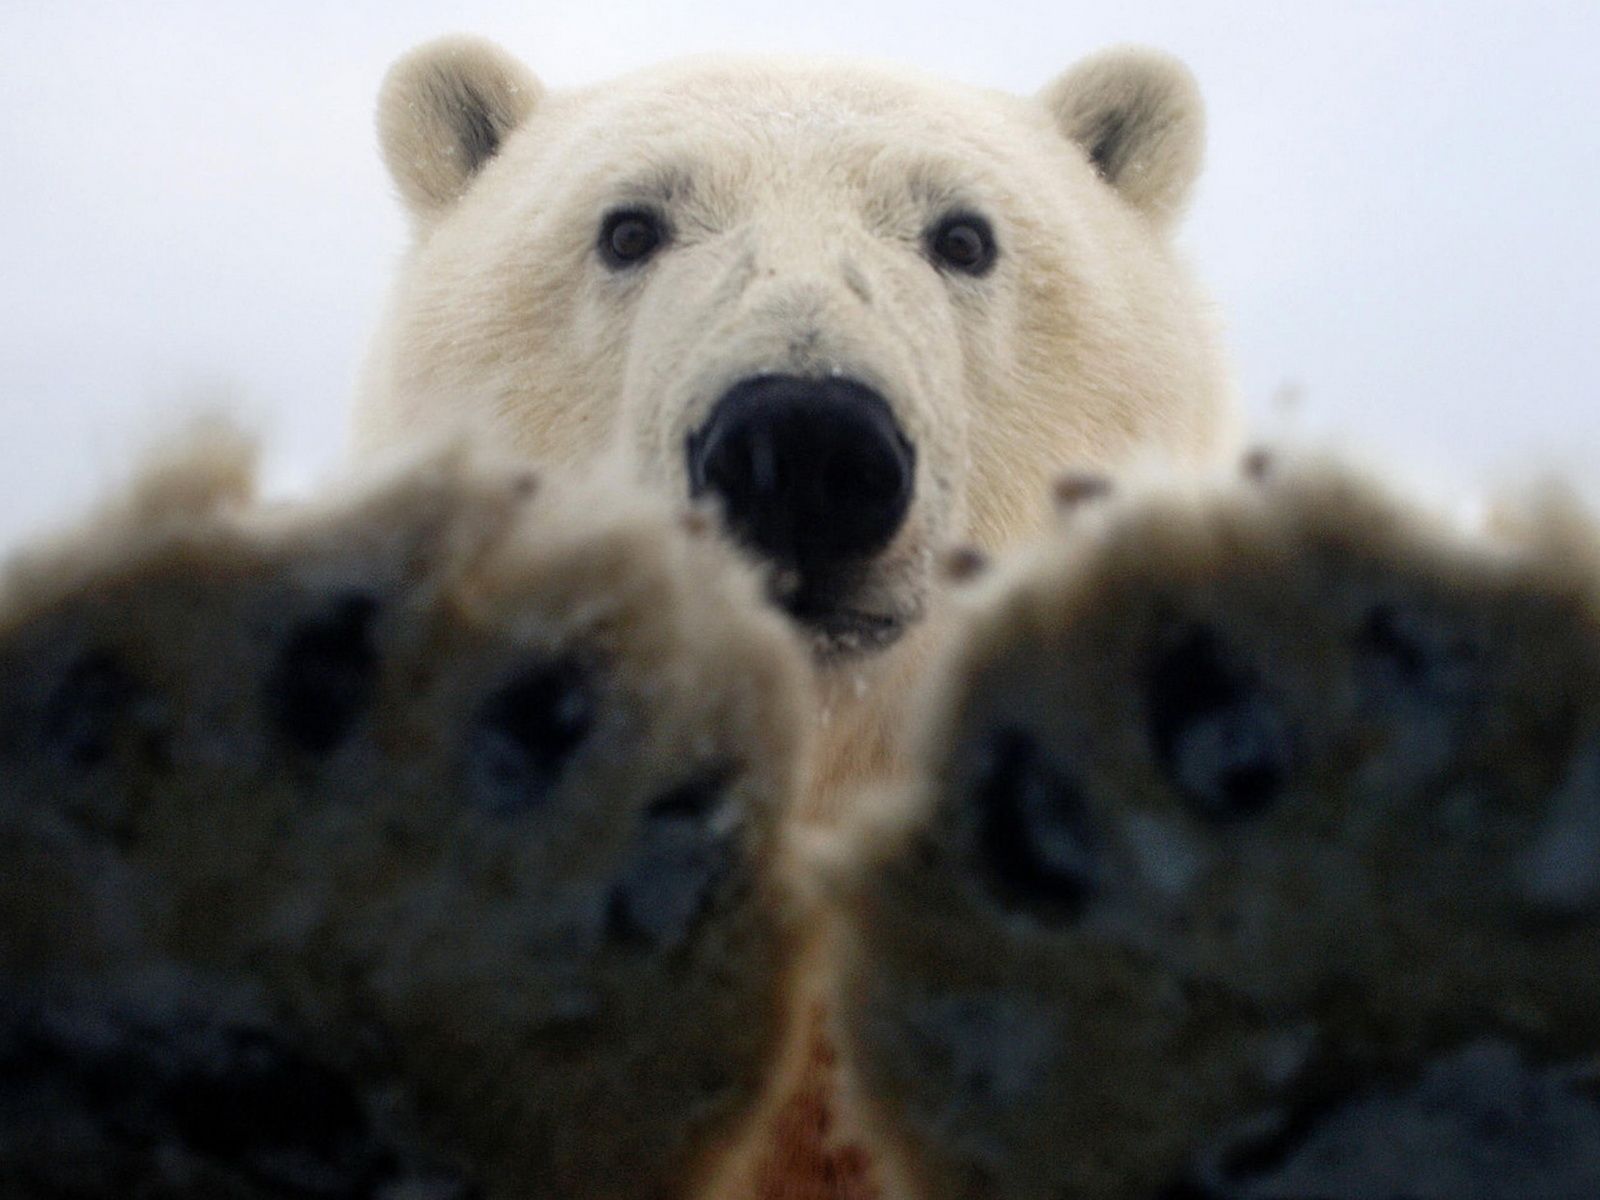 Paws of a polar bear wallpapers and images - wallpapers, pictures